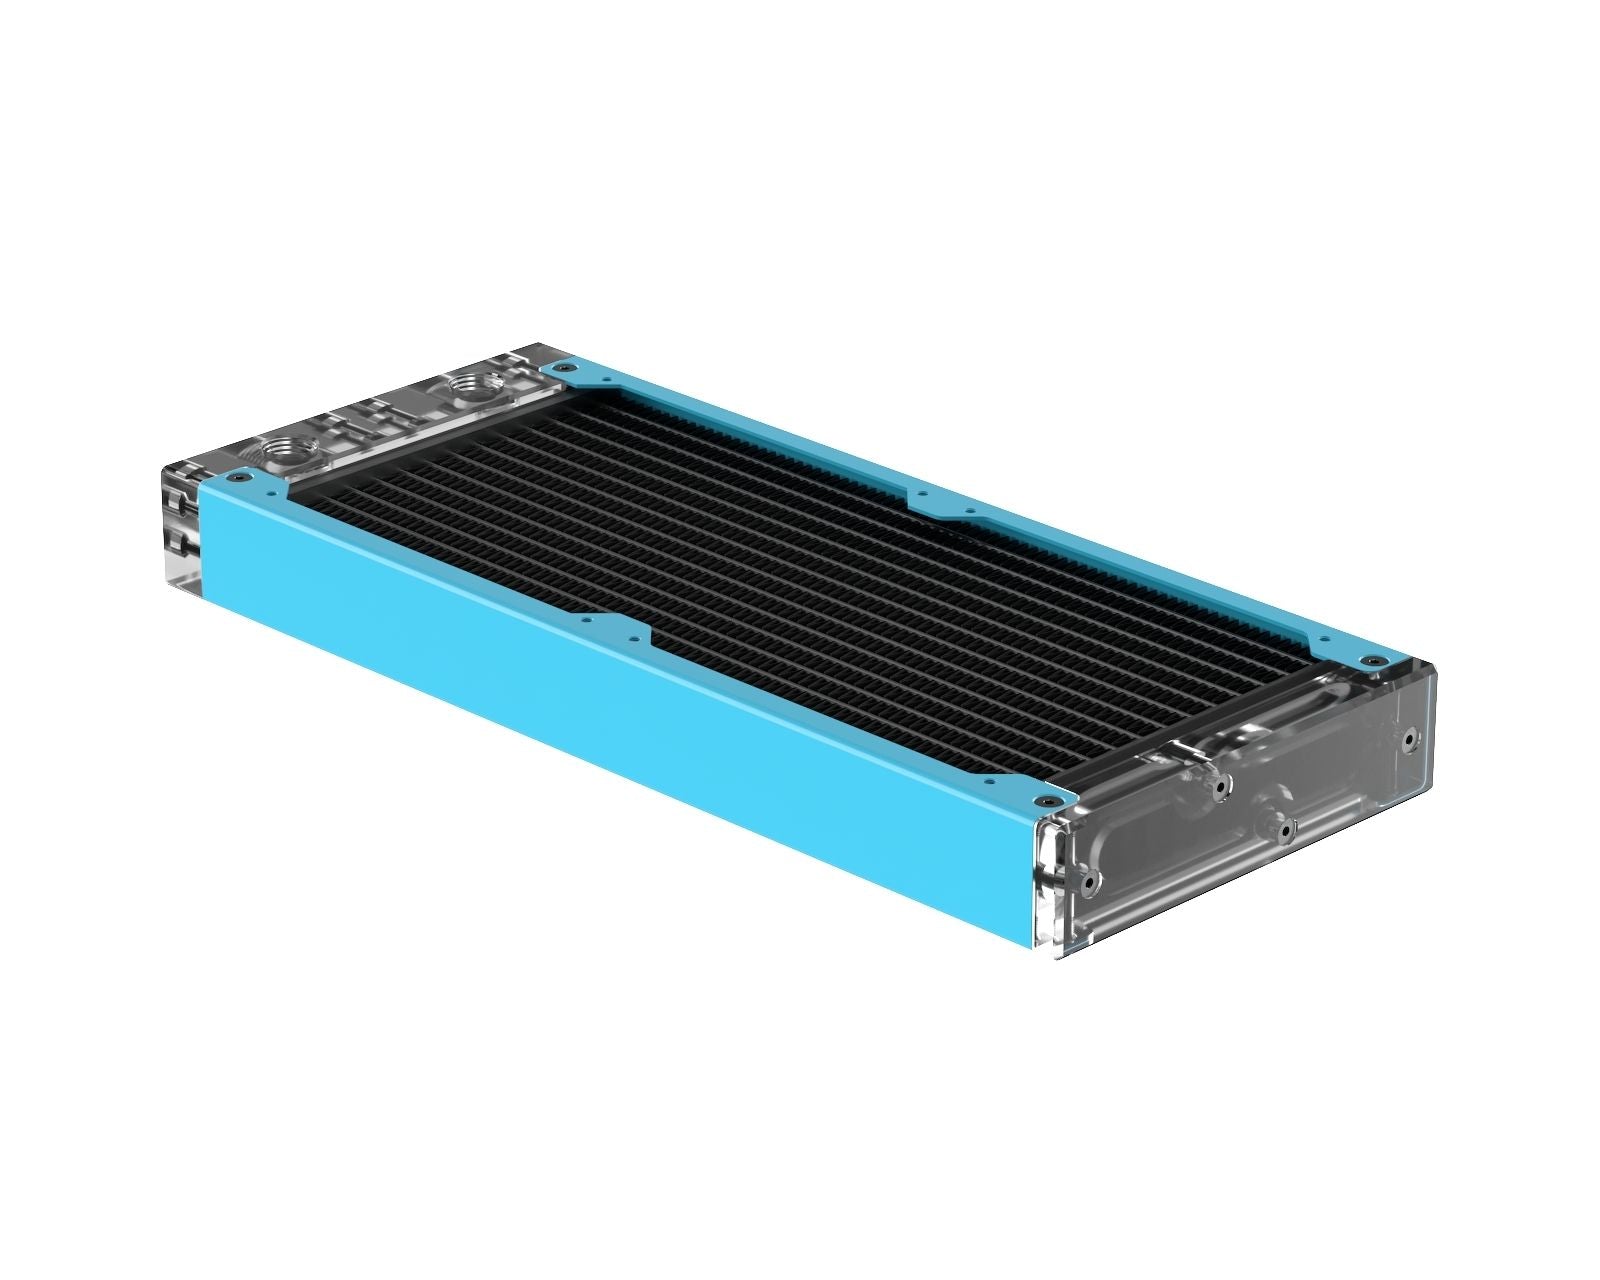 PrimoChill 240SL (30mm) EXIMO Modular Radiator, Clear Acrylic, 2x120mm, Dual Fan (R-SL-A24) Available in 20+ Colors, Assembled in USA and Custom Watercooling Loop Ready - Sky Blue